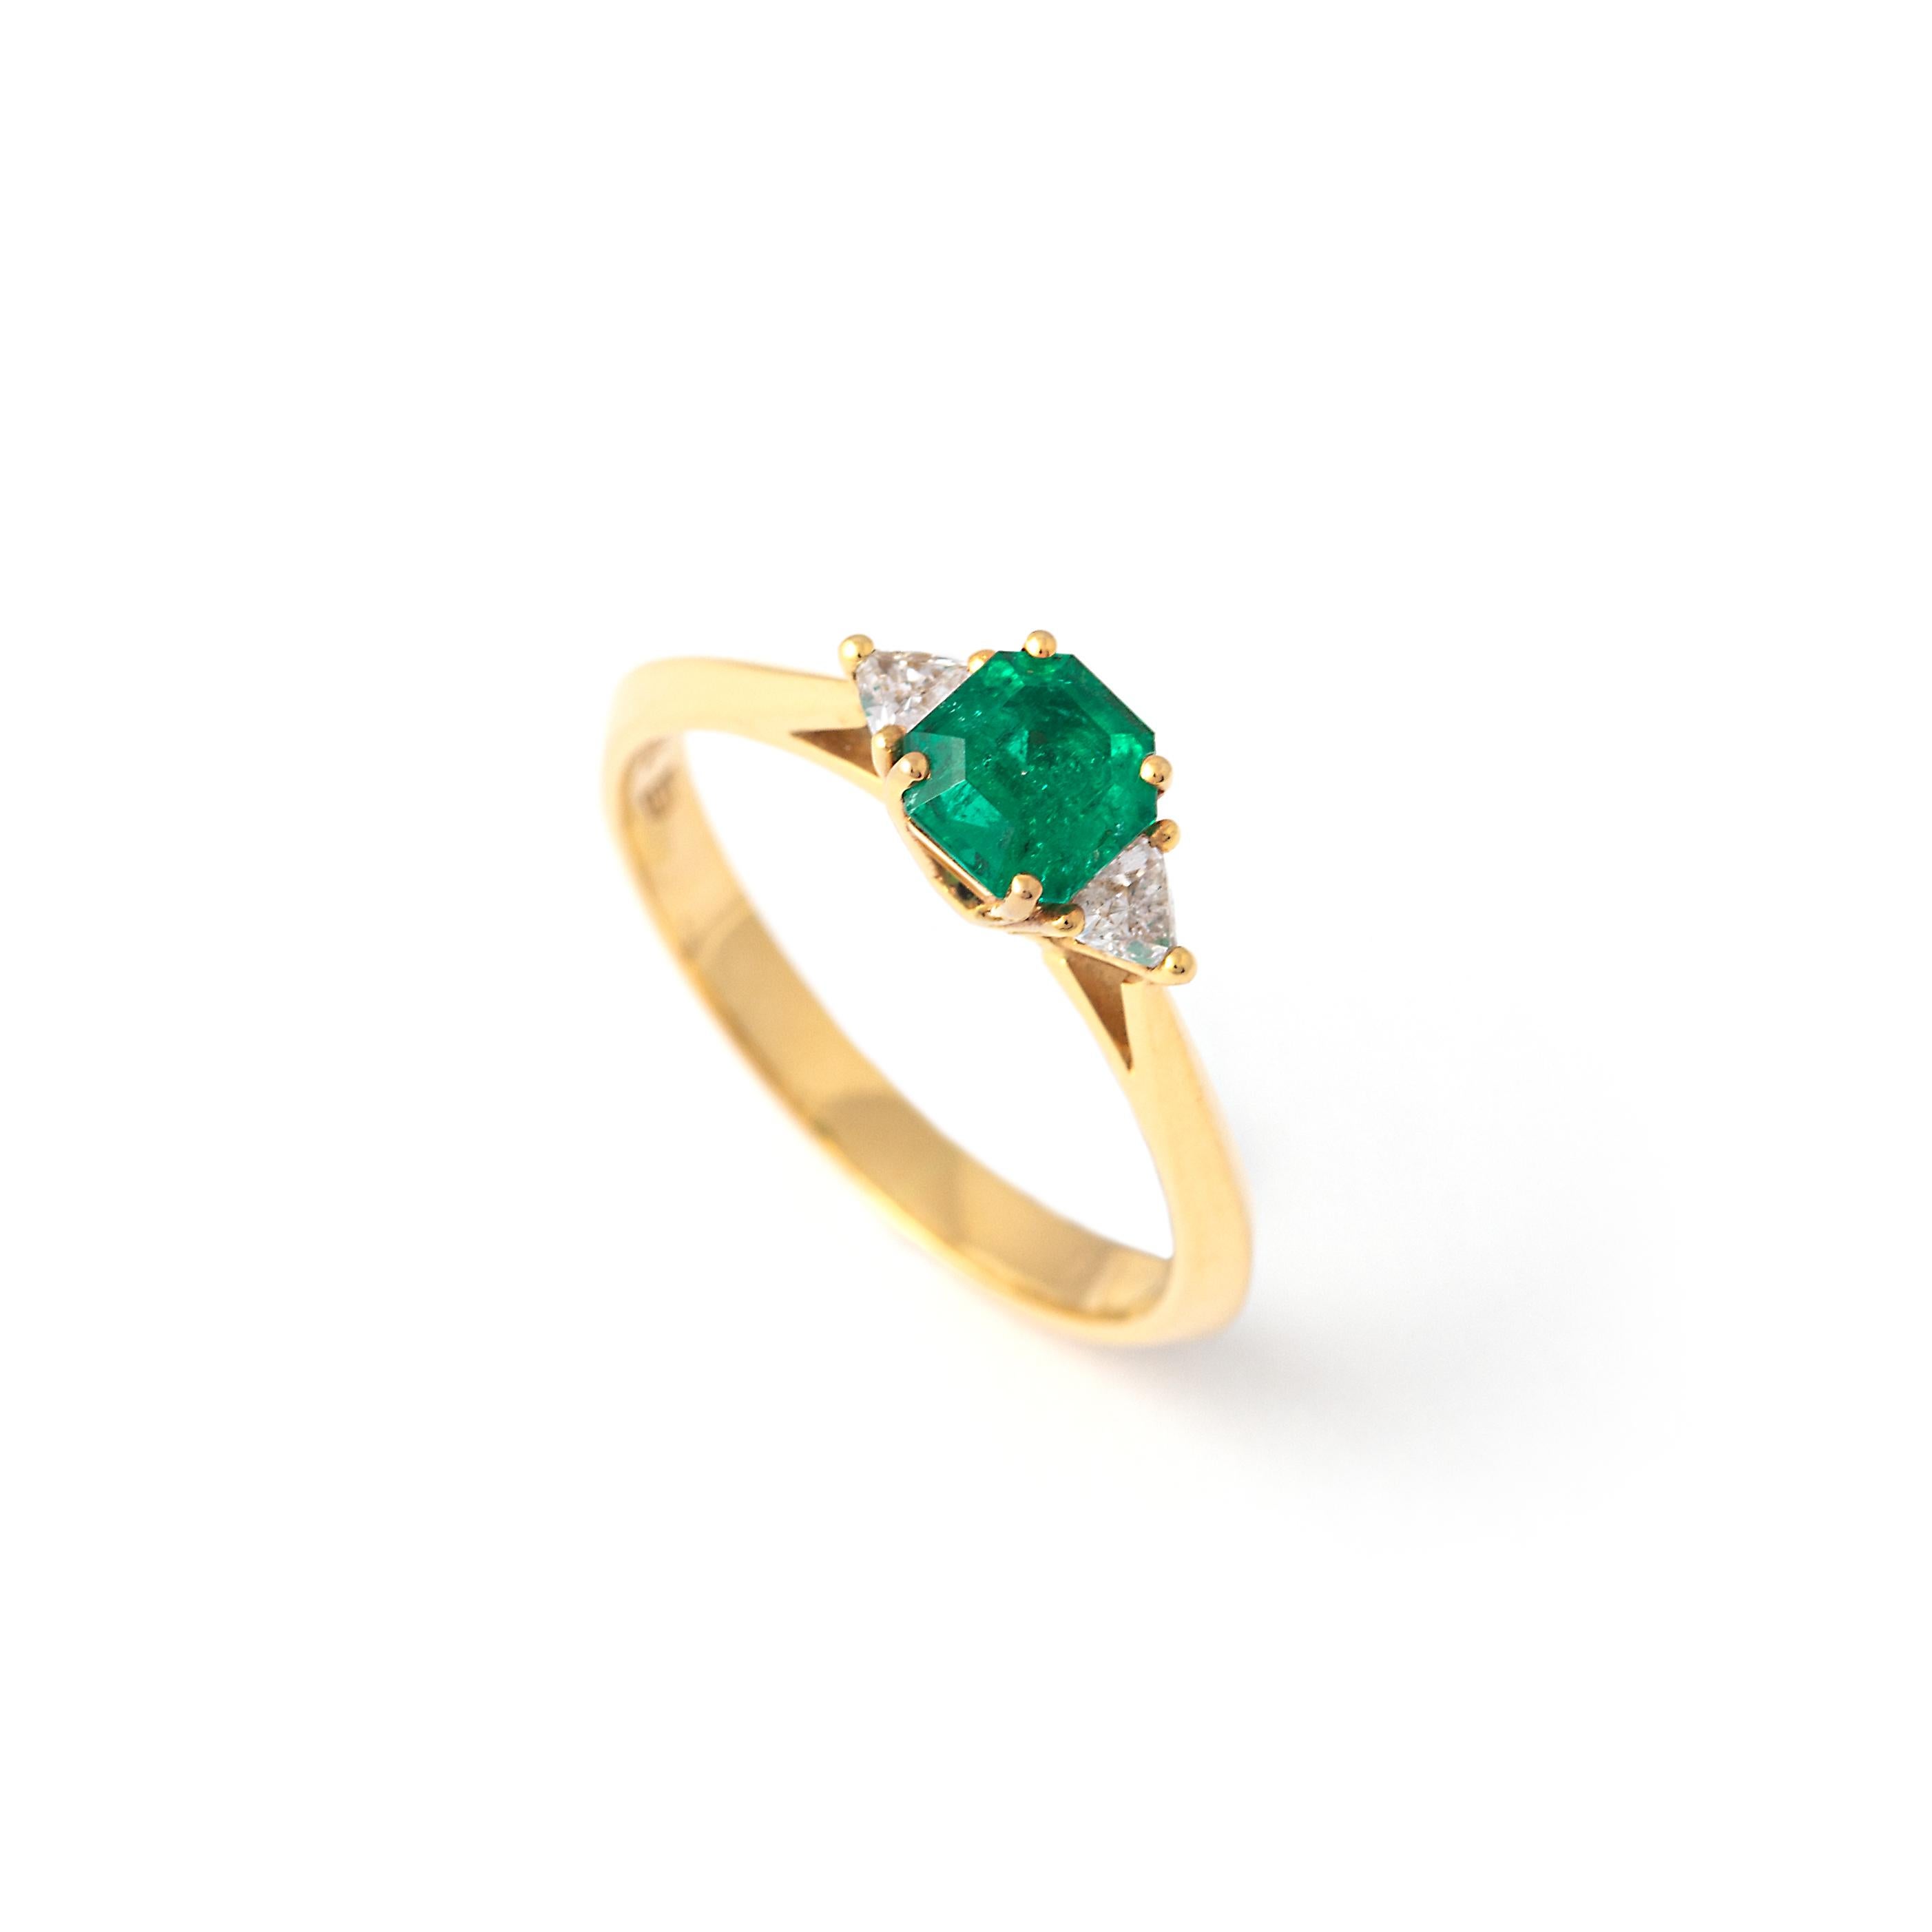 Emerald and Diamond Yellow Gold 18K Ring.
Centered by an Emerald of 0.58 carat and two diamonds.
Total gross weight; 2.43 grams.
Size: 6.
